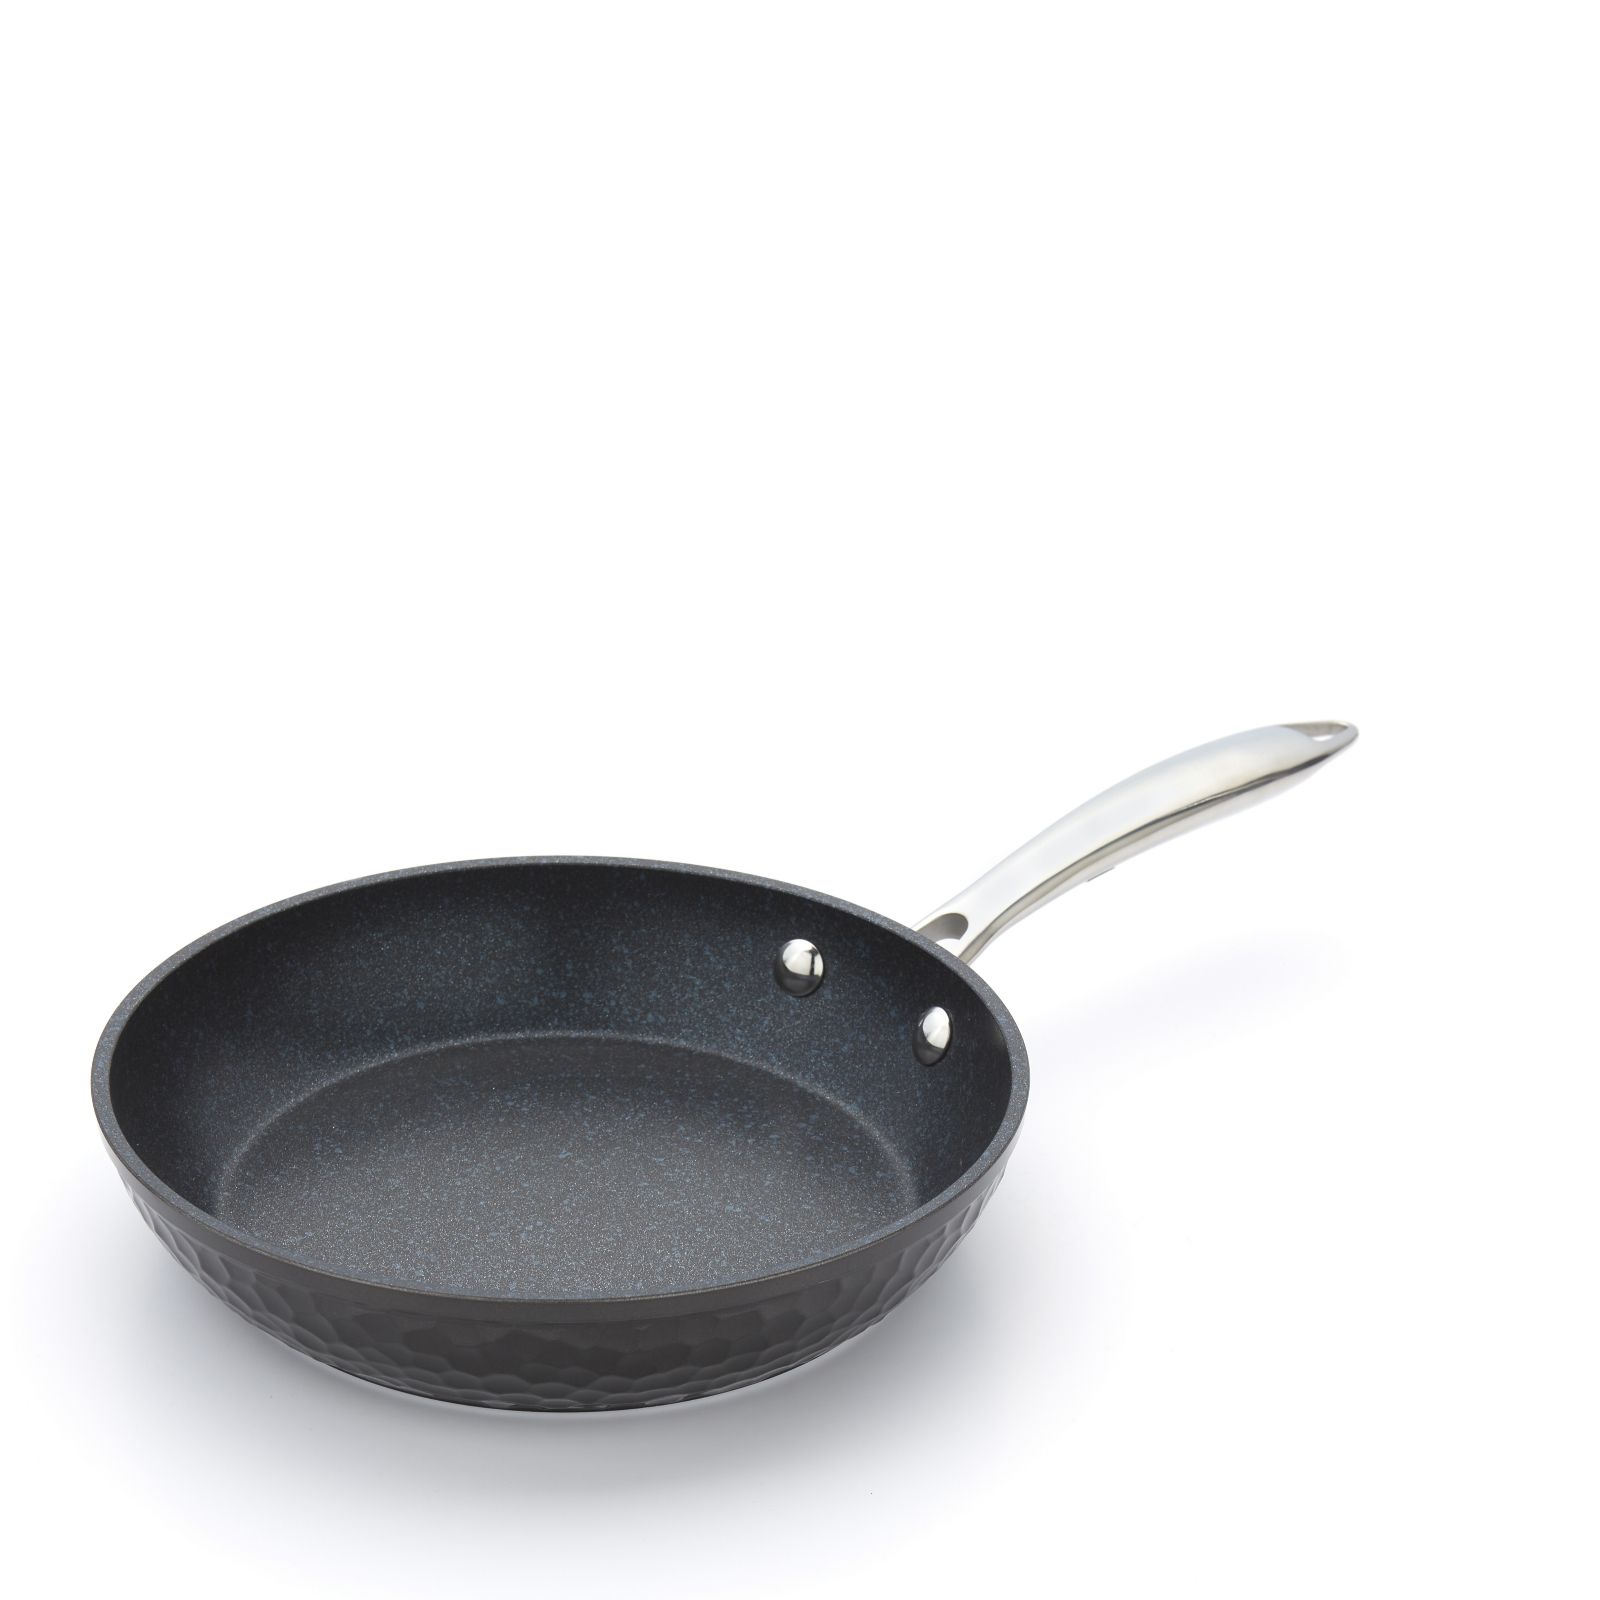 Hammer Pans 20cm & 28cm Non-Stick Frying Pan Stainless Steel Handles ...